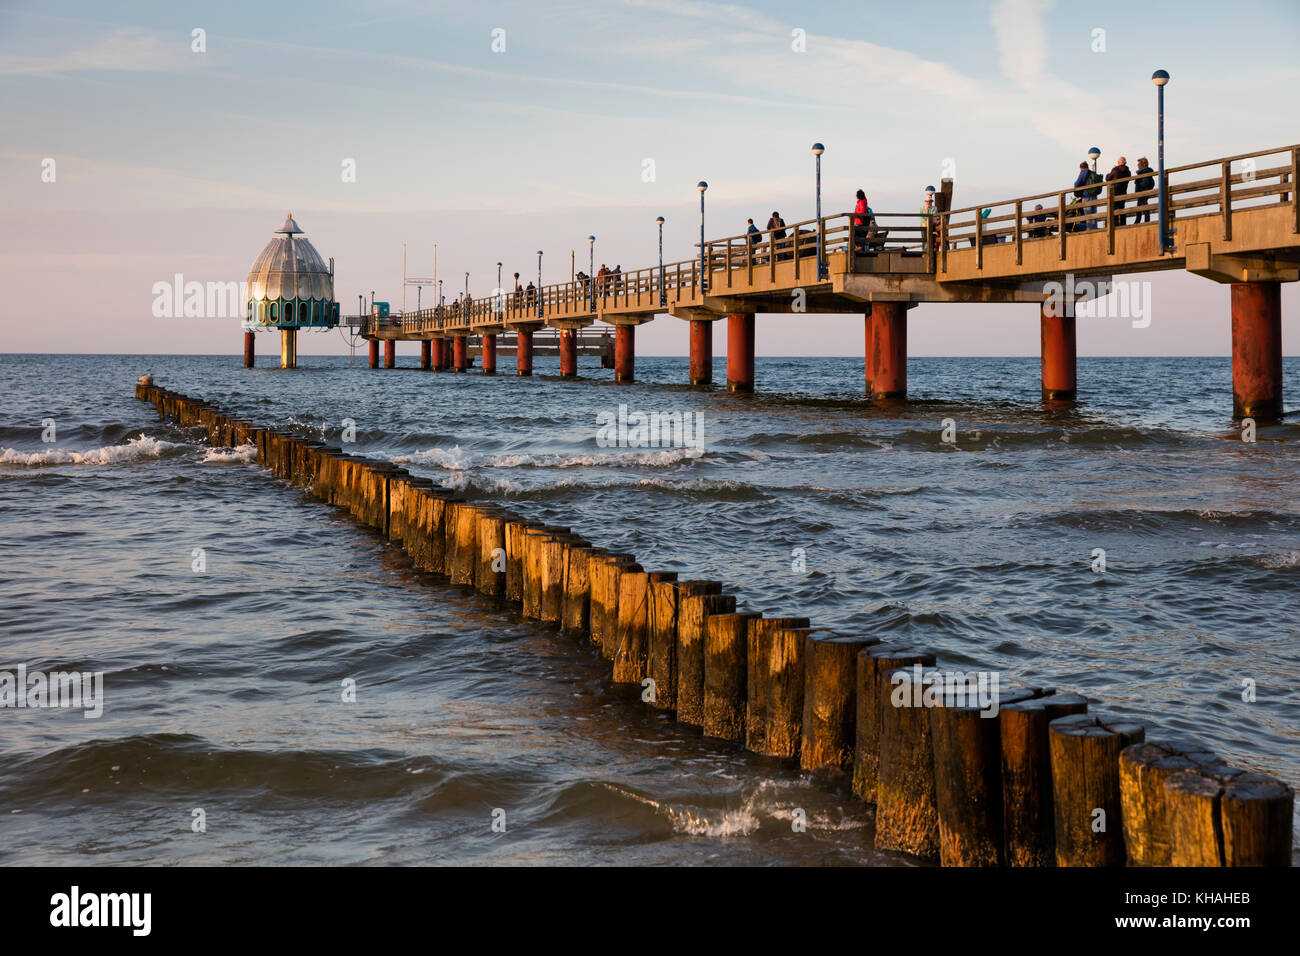 Zingst seebrucke images hi-res and Alamy photography - stock